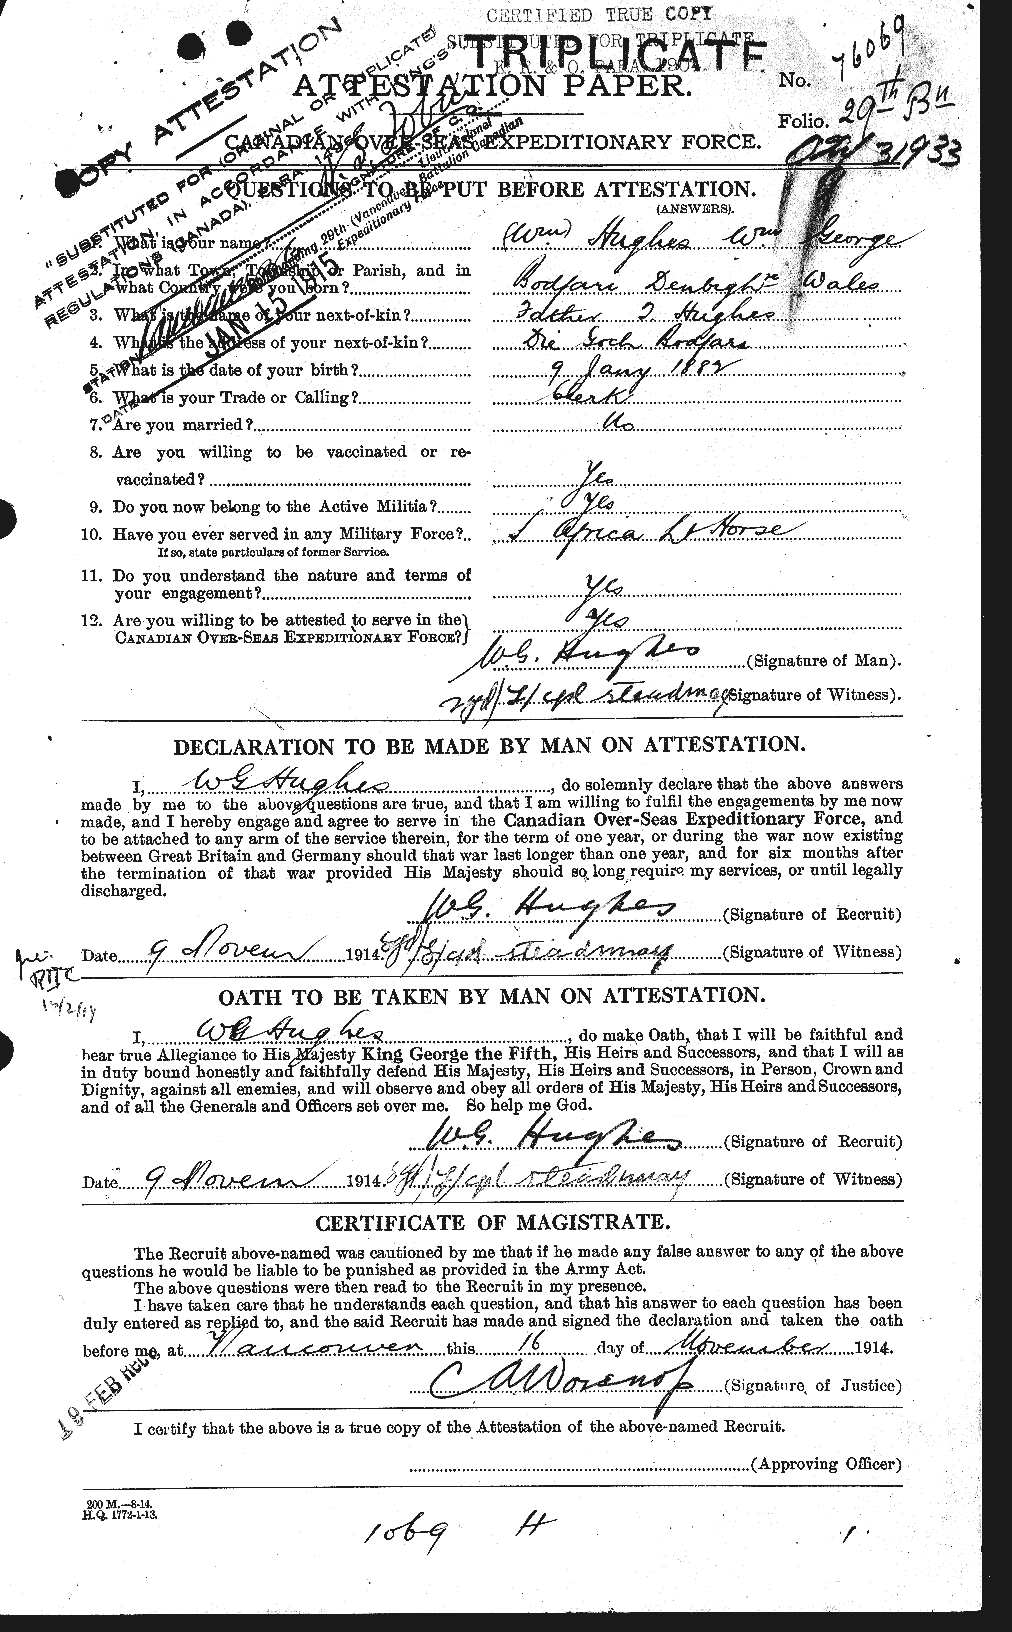 Personnel Records of the First World War - CEF 405923a